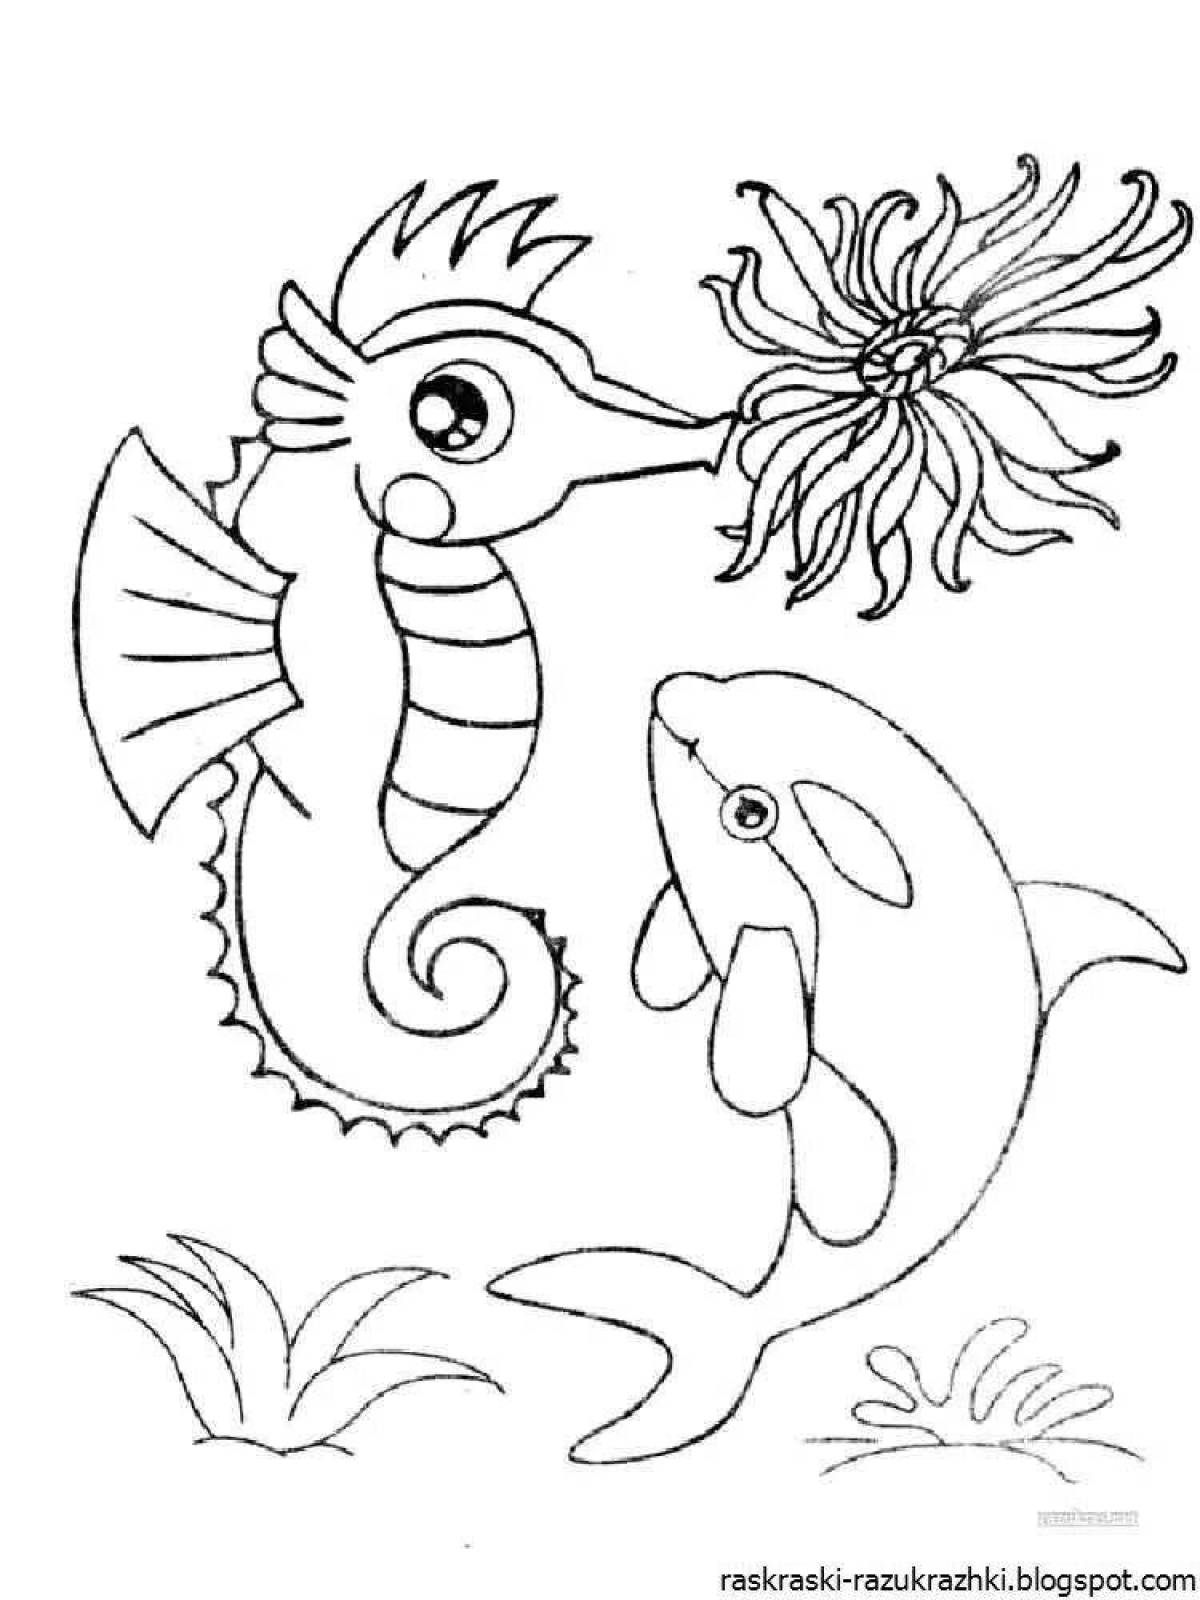 Fun coloring pages of marine life